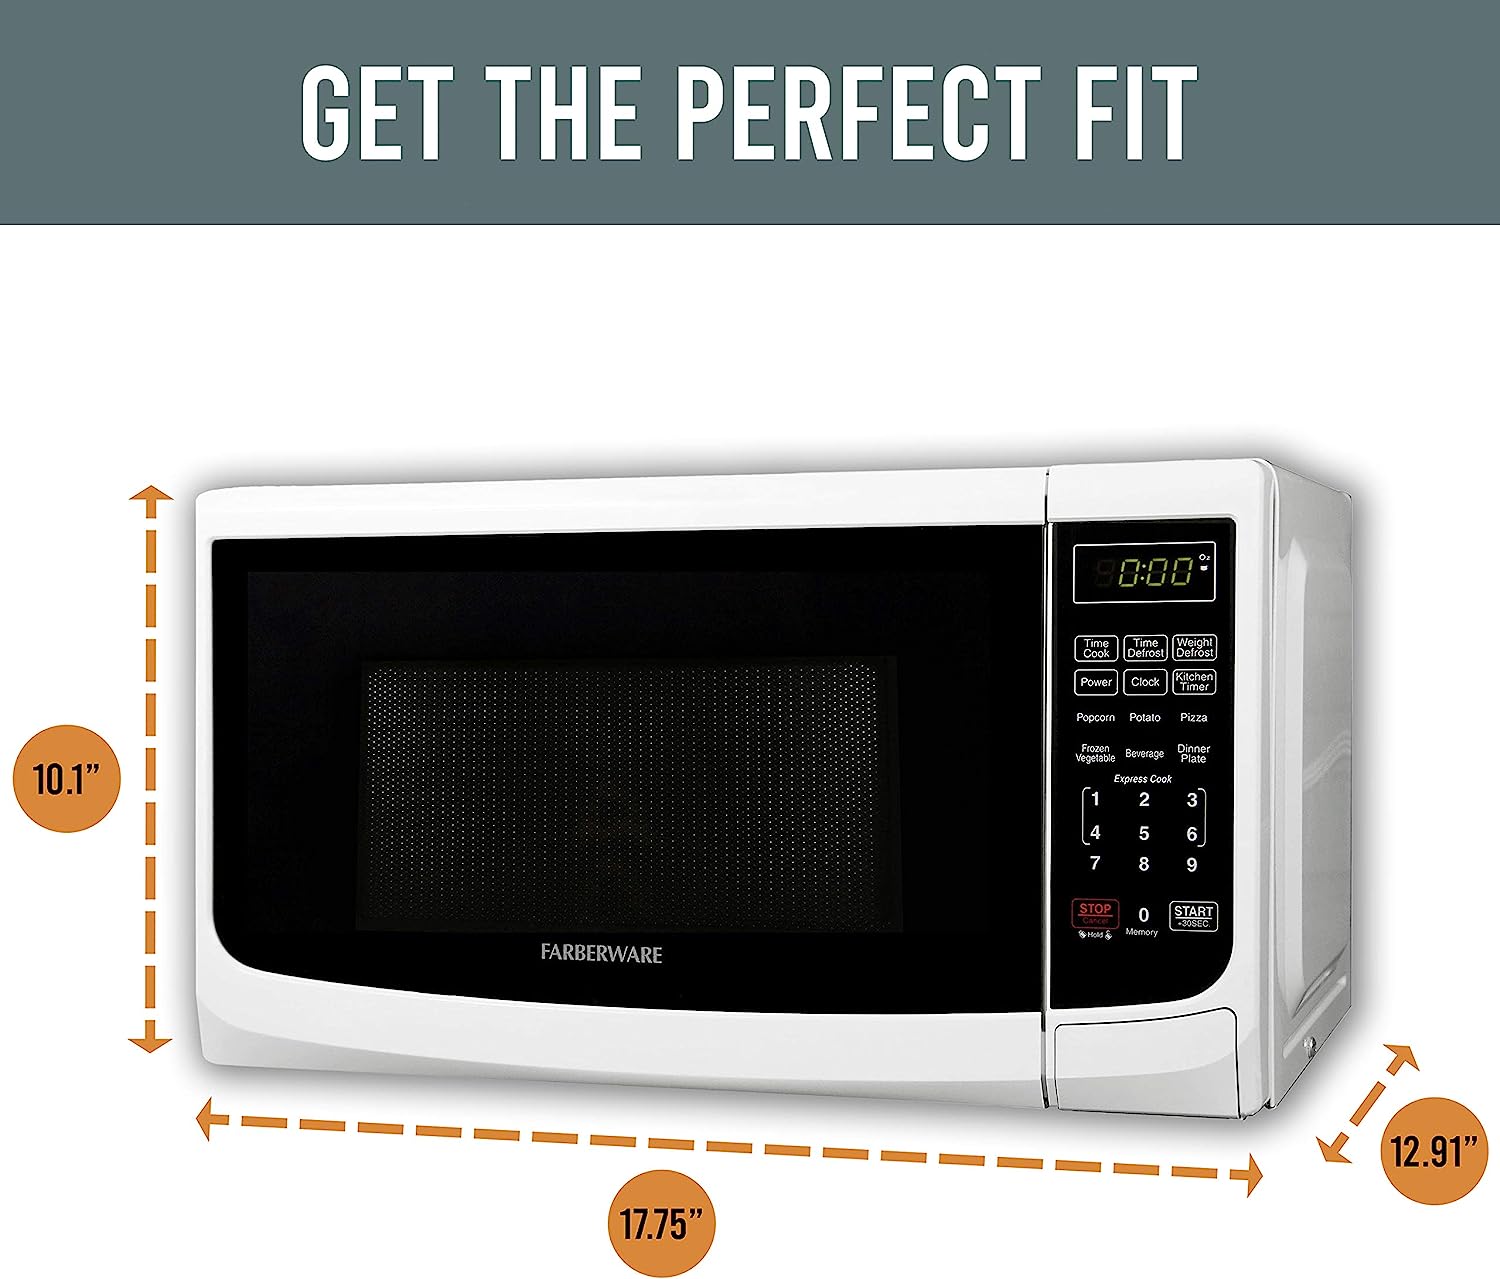  Farberware Countertop Microwave 700 Watts, 0.7 cu ft - Microwave  Oven With LED Lighting and Child Lock - Perfect for Apartments and Dorms -  Easy Clean Grey Interior, Retro Black: Home & Kitchen